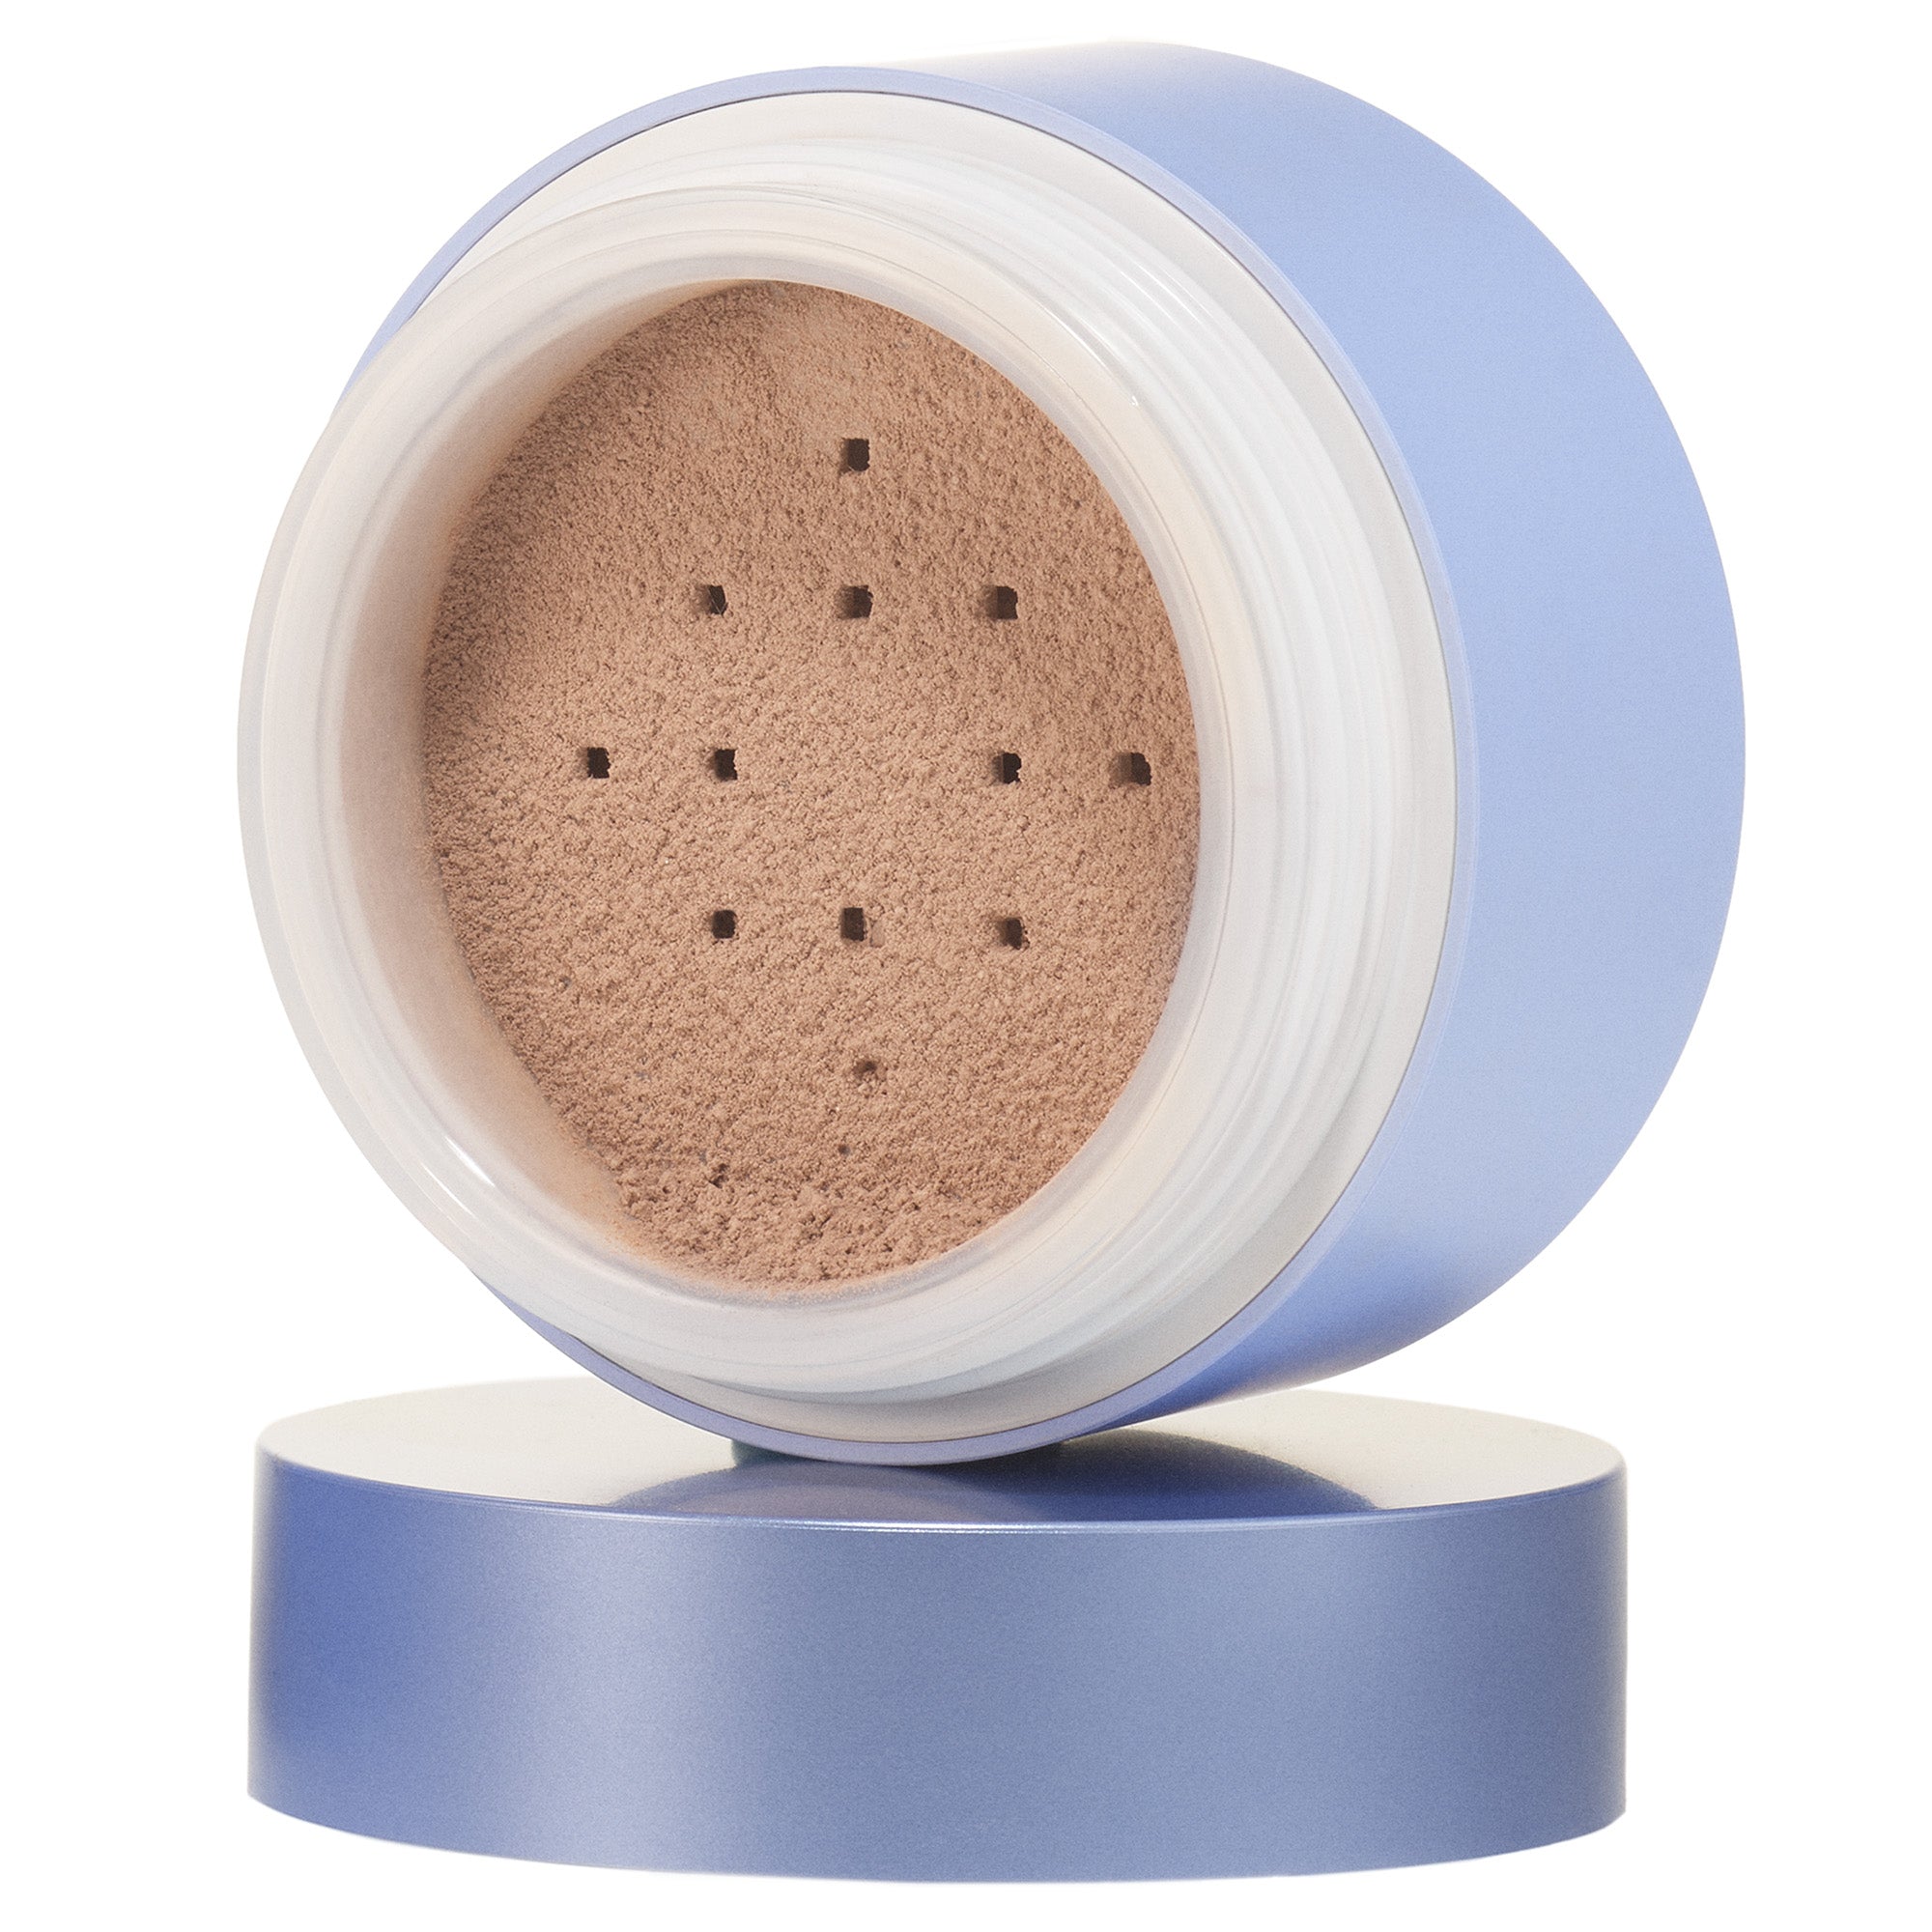 You Are Luminous Deluxe Original Loose Mineral Foundation SPF 15 view 1